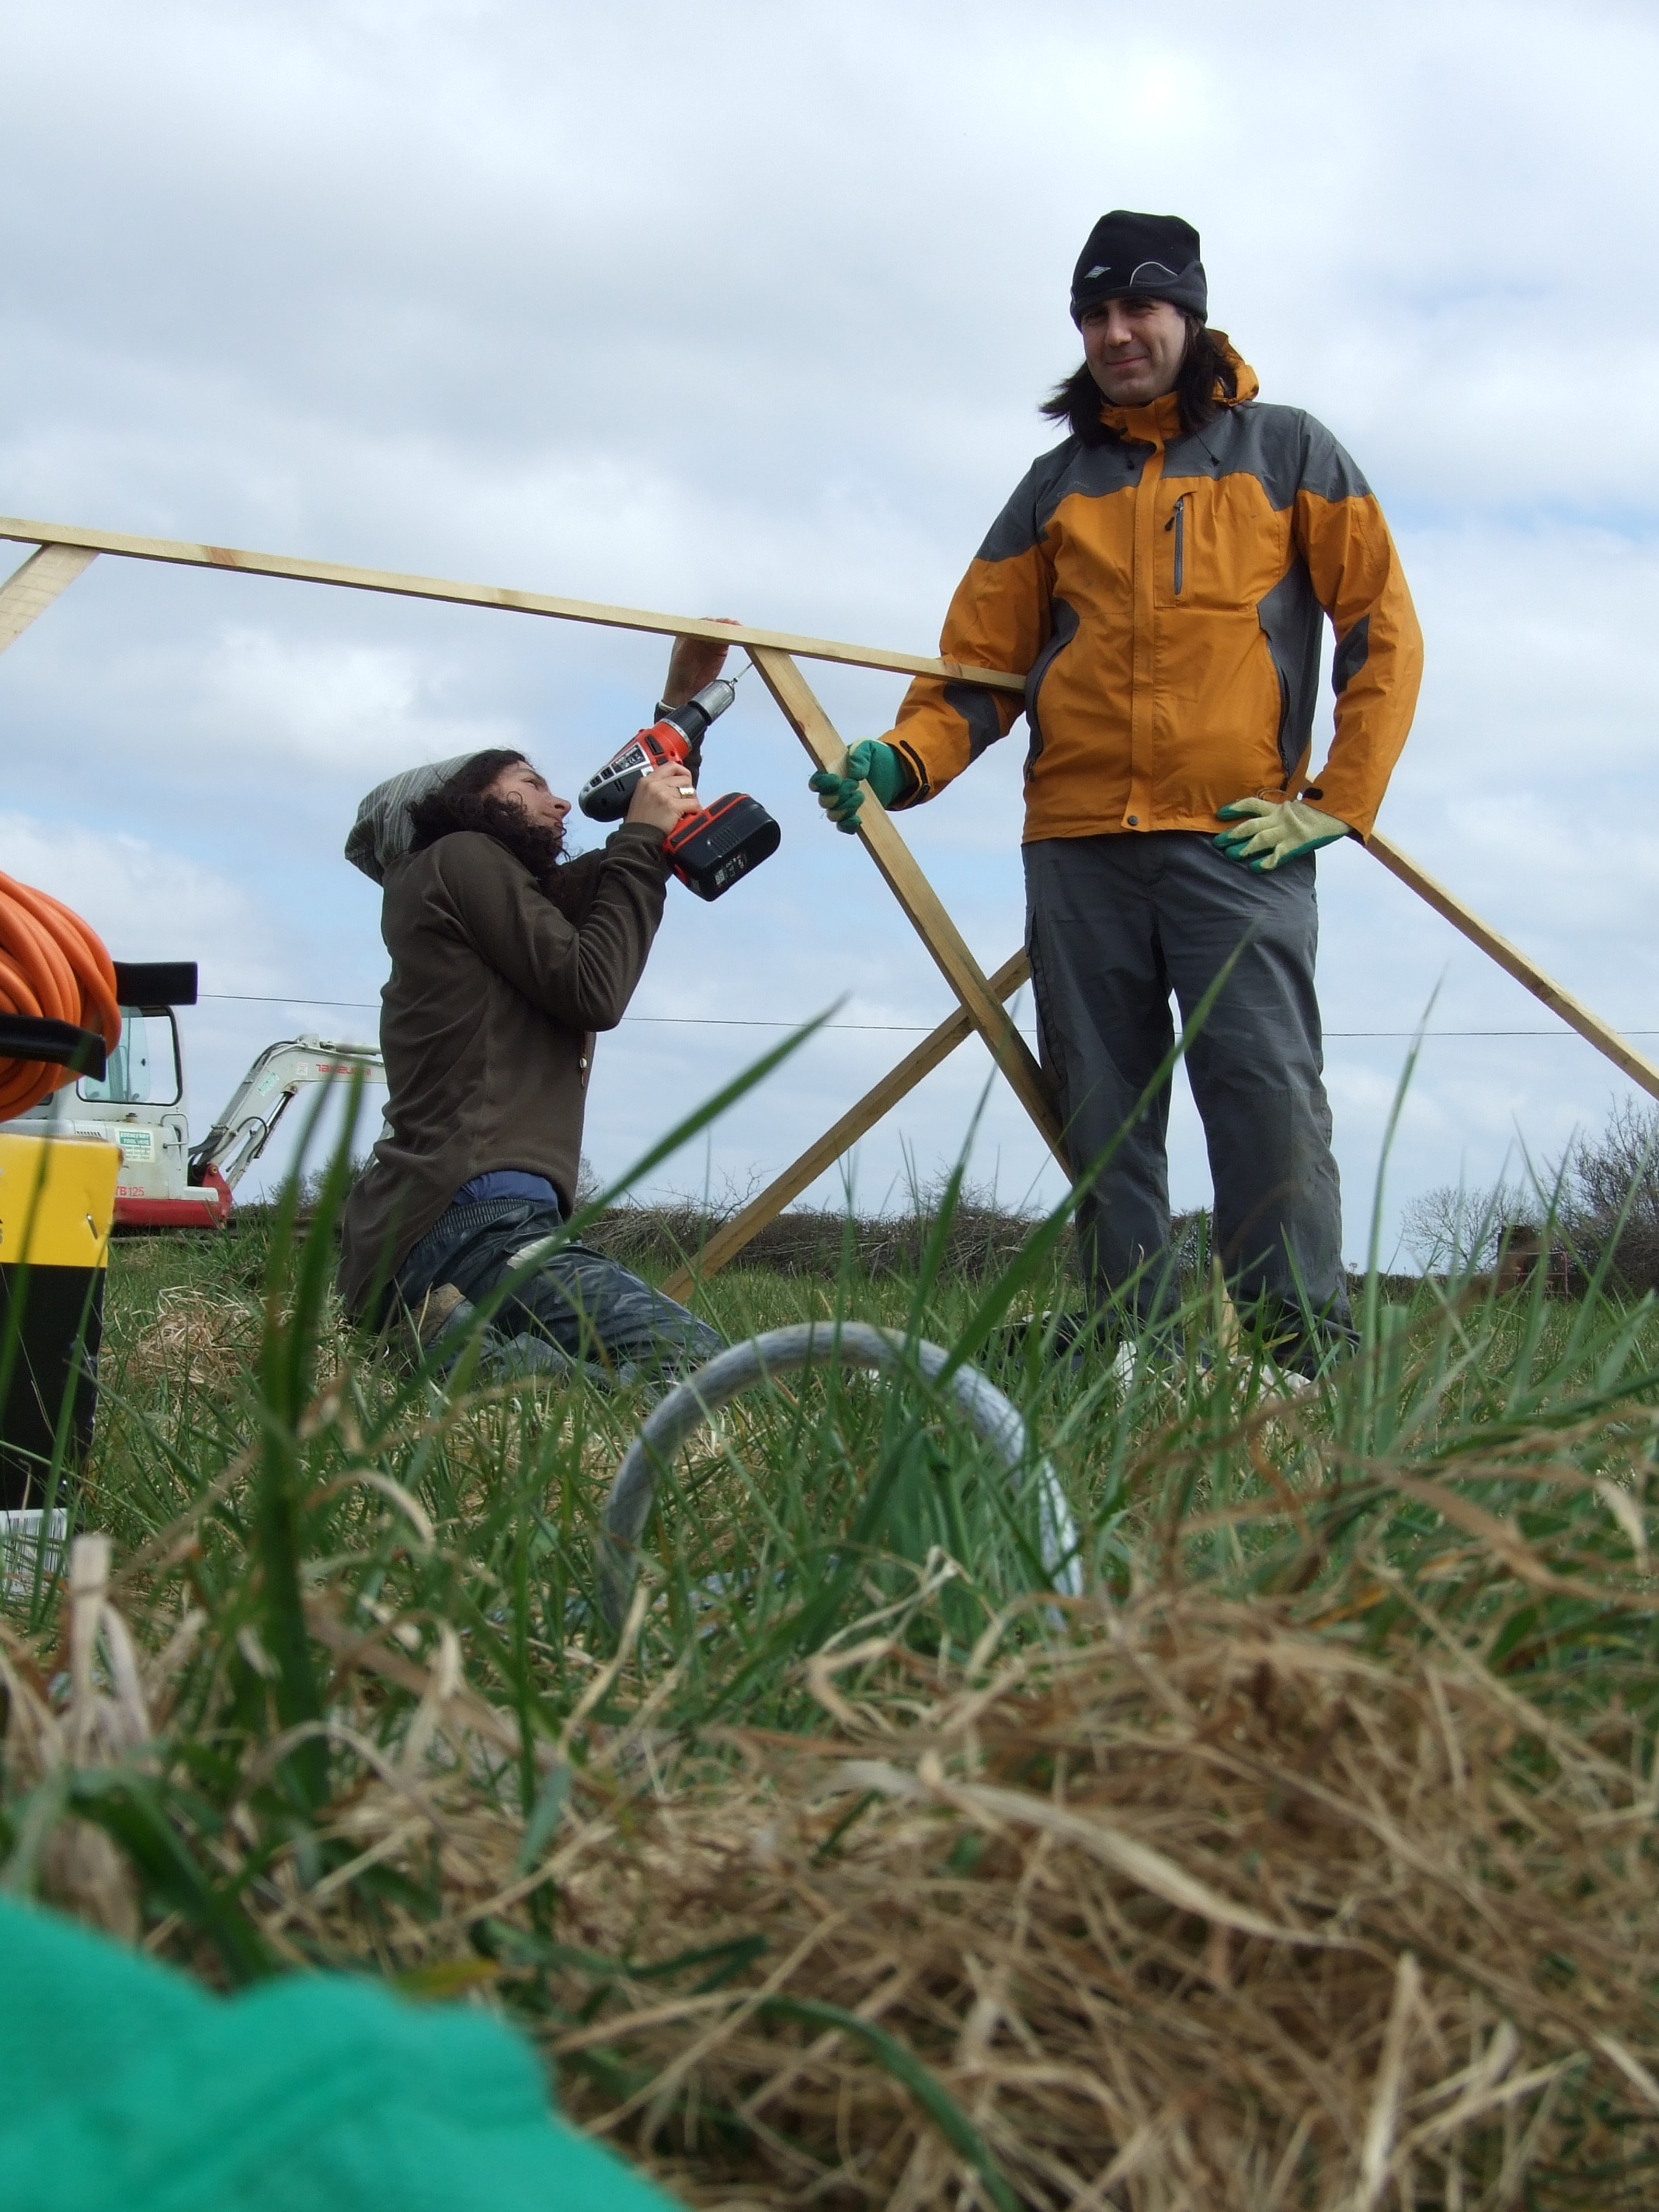 April 2010 Erica Cacciotti and Saul Otero built 'rain-out' shelters for a climate manipulation experiment at the ash chronosequence sites